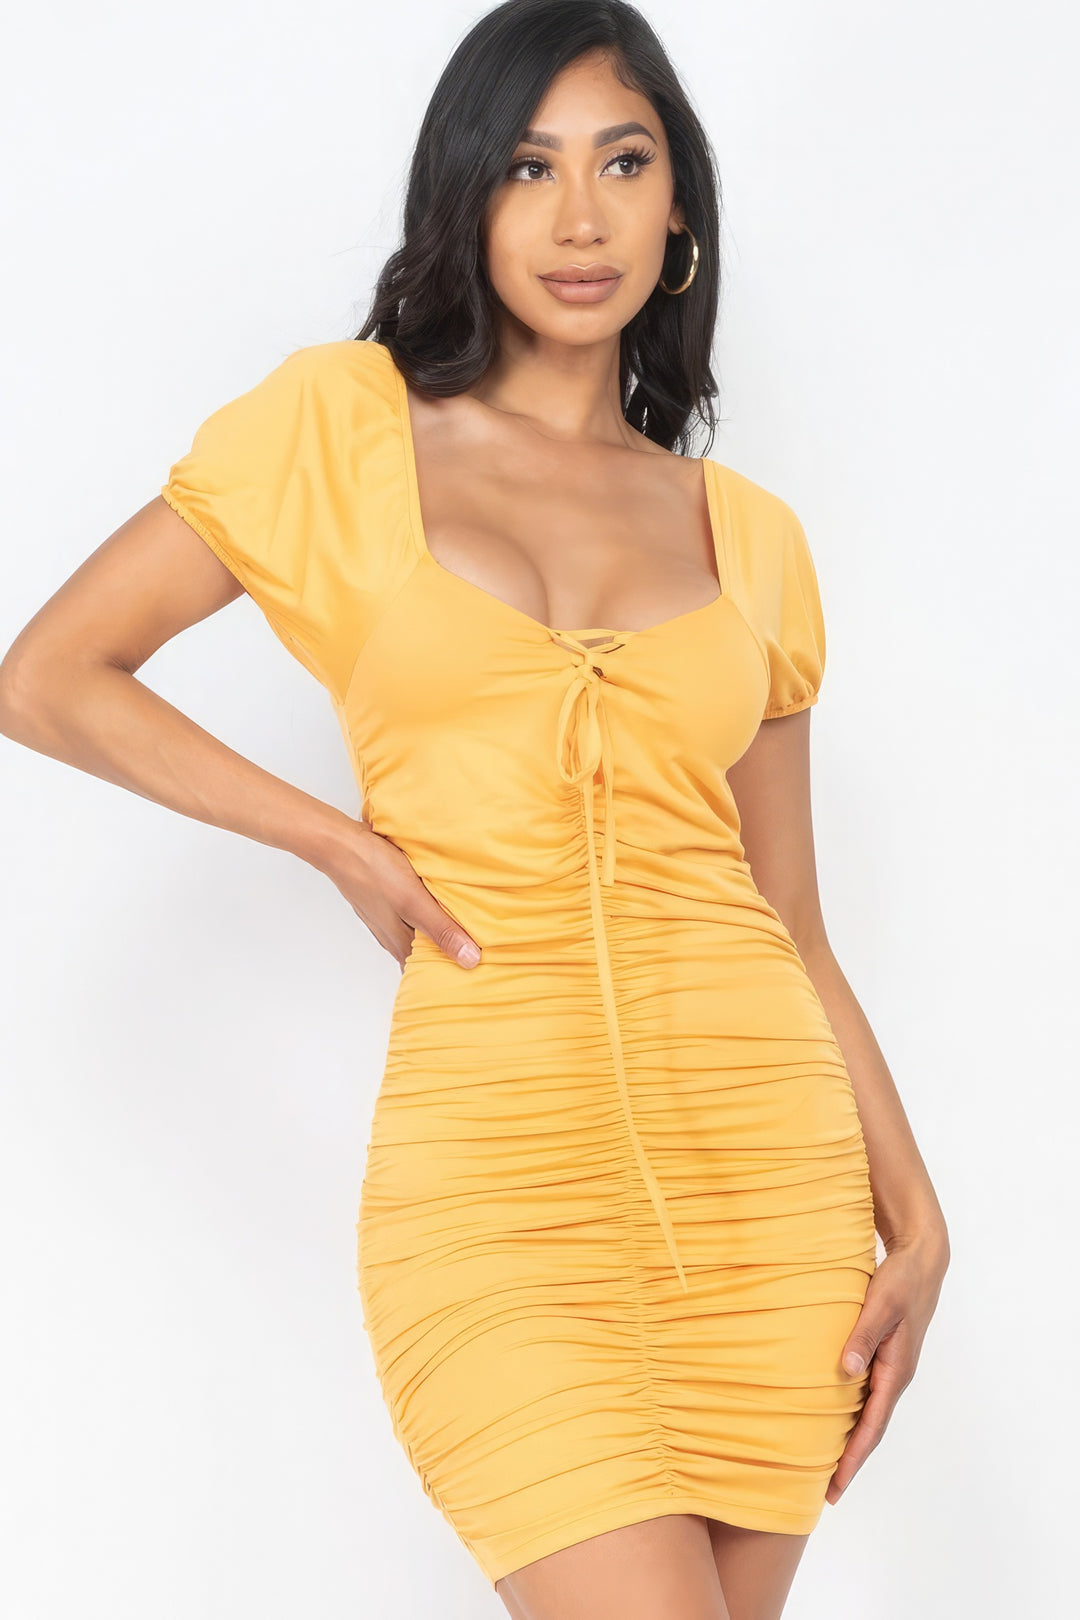 Lace-Up Ruched Mini Dress with Front Detail for Women in Amber - Sizes S/M/L